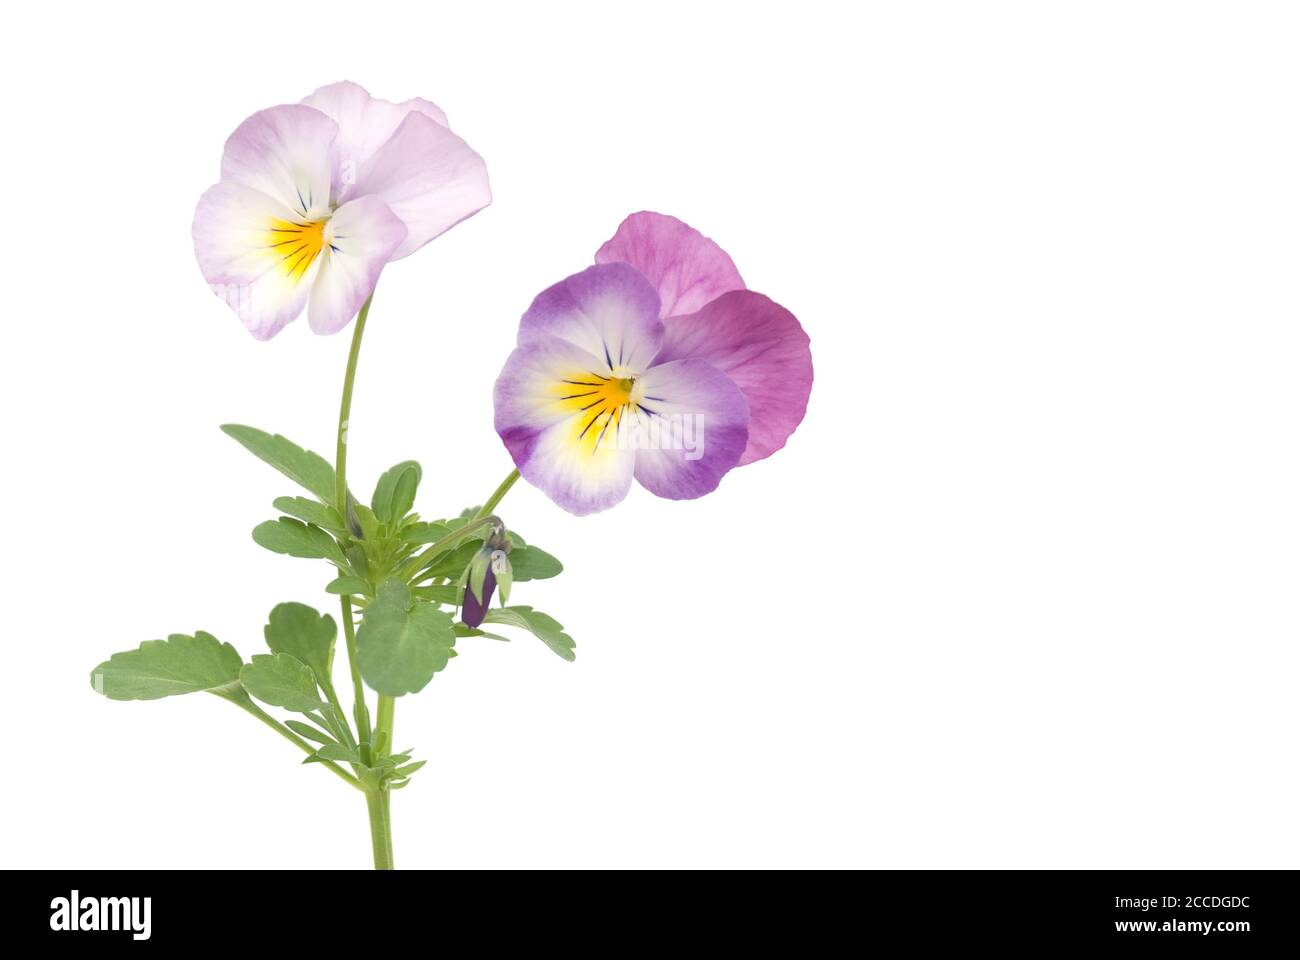 Isolated pansies against white background Stock Photo